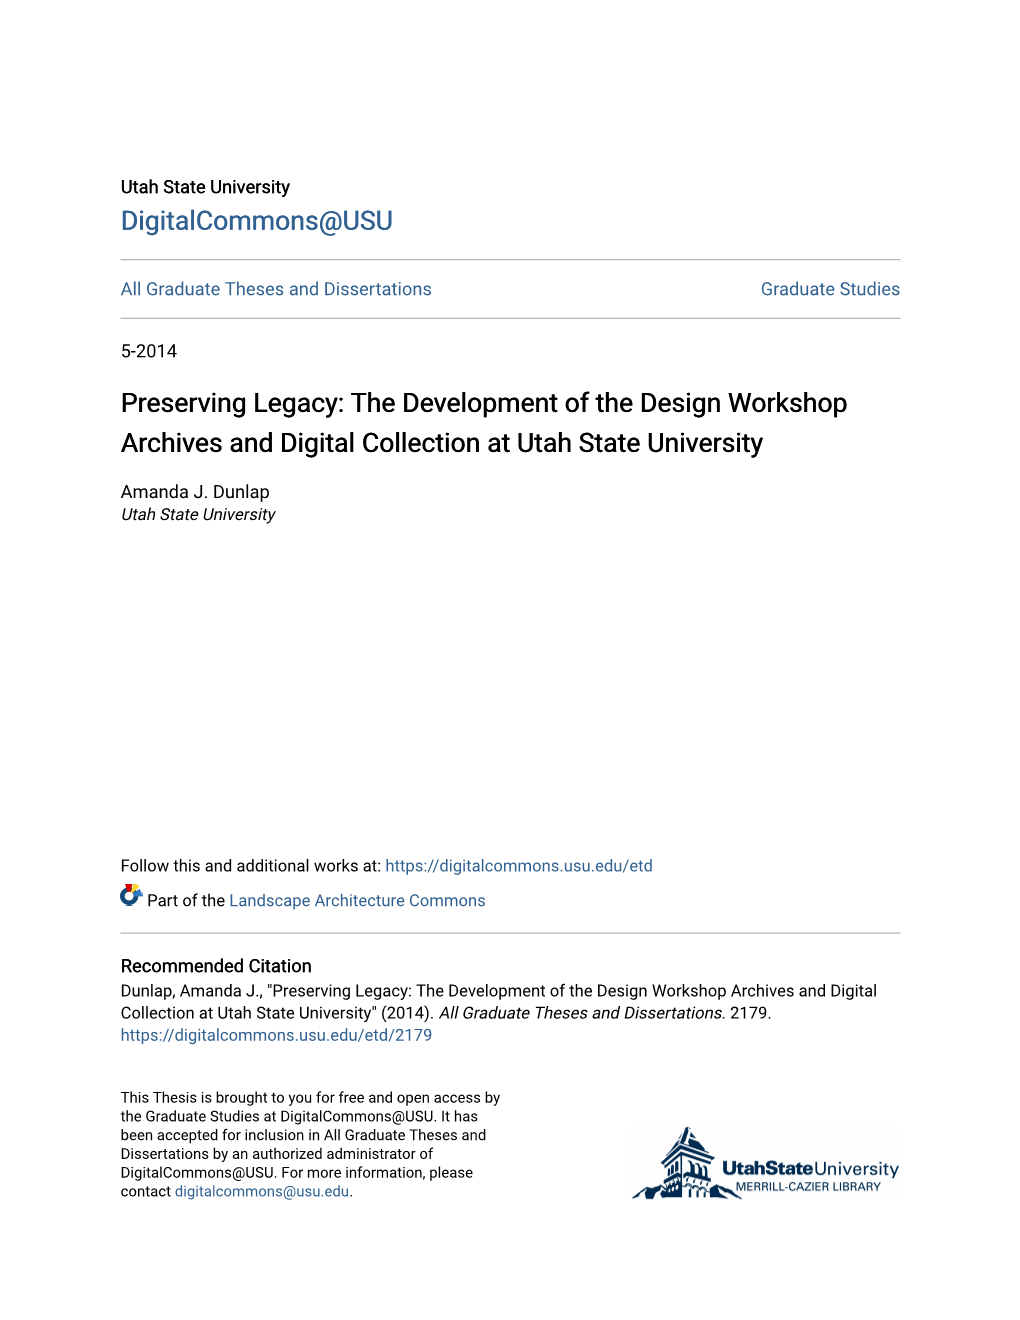 The Development of the Design Workshop Archives and Digital Collection at Utah State University